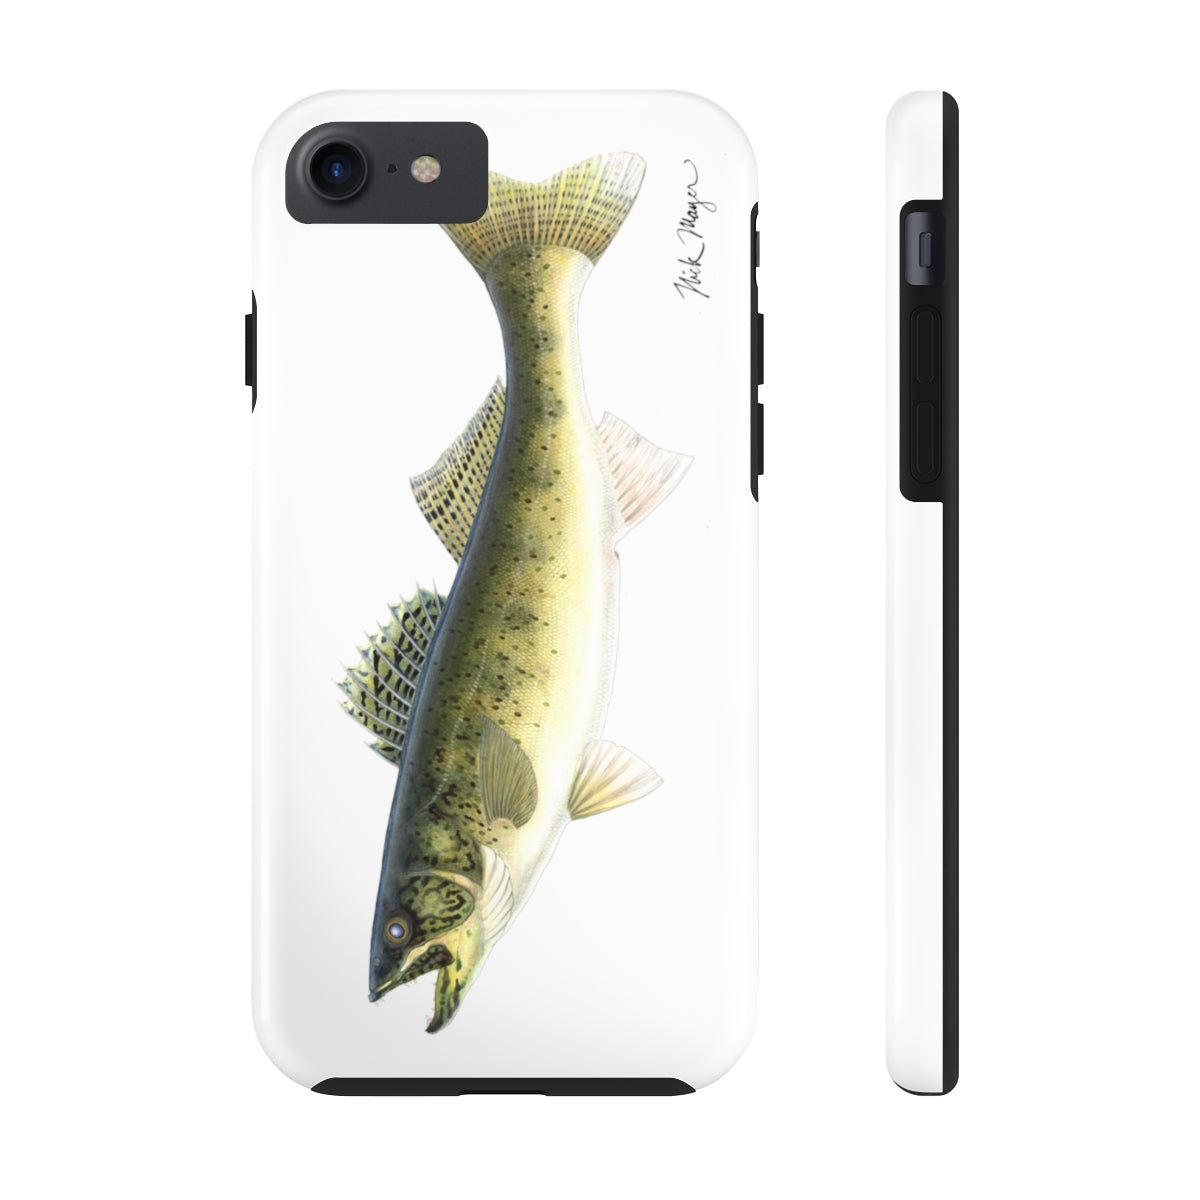 Walleye Phone Case: Exclusive design, durable protection for iPhone